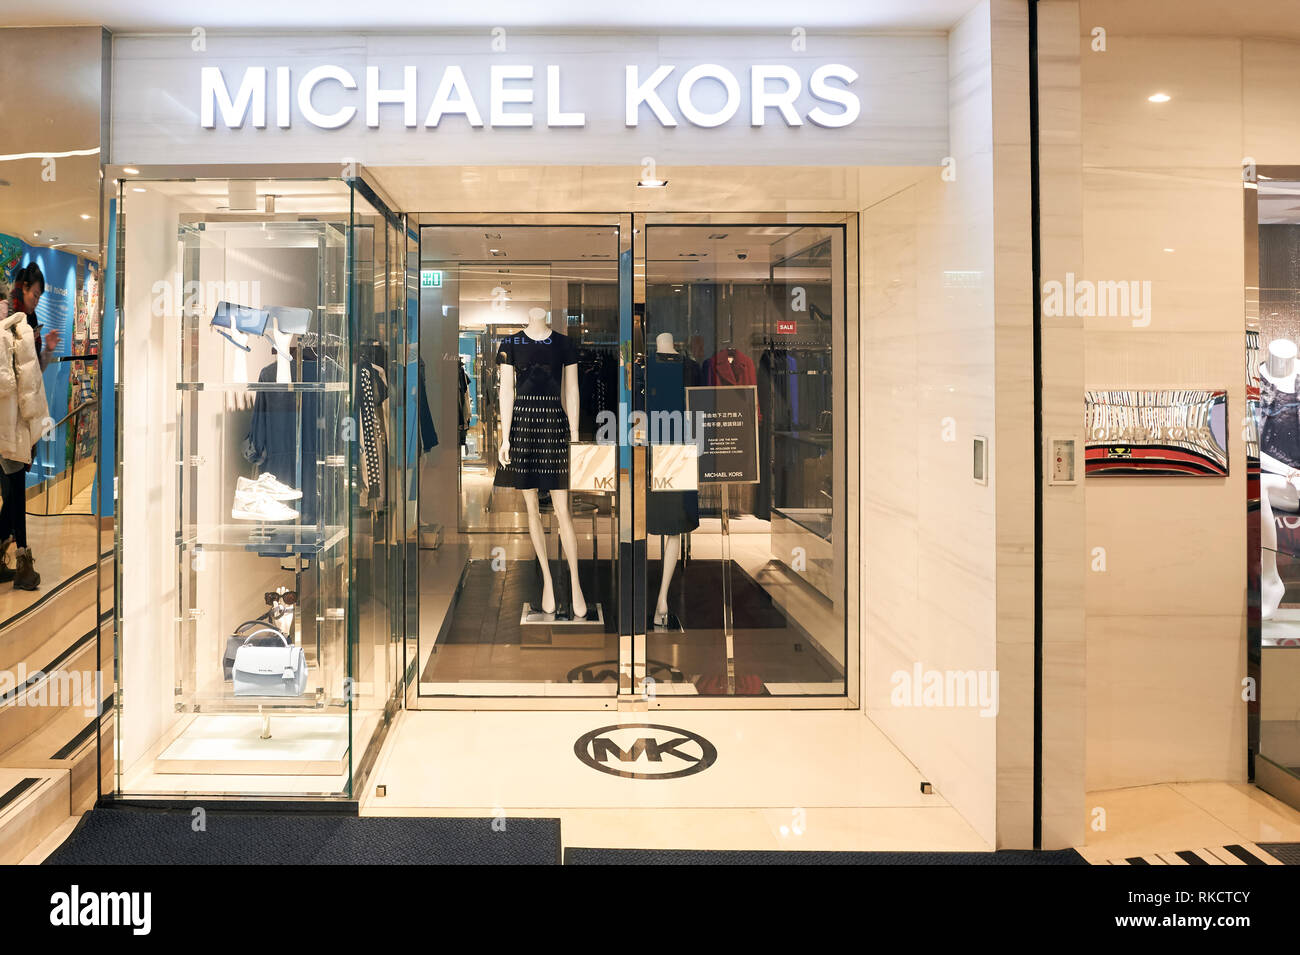 michael kors outlet clothing